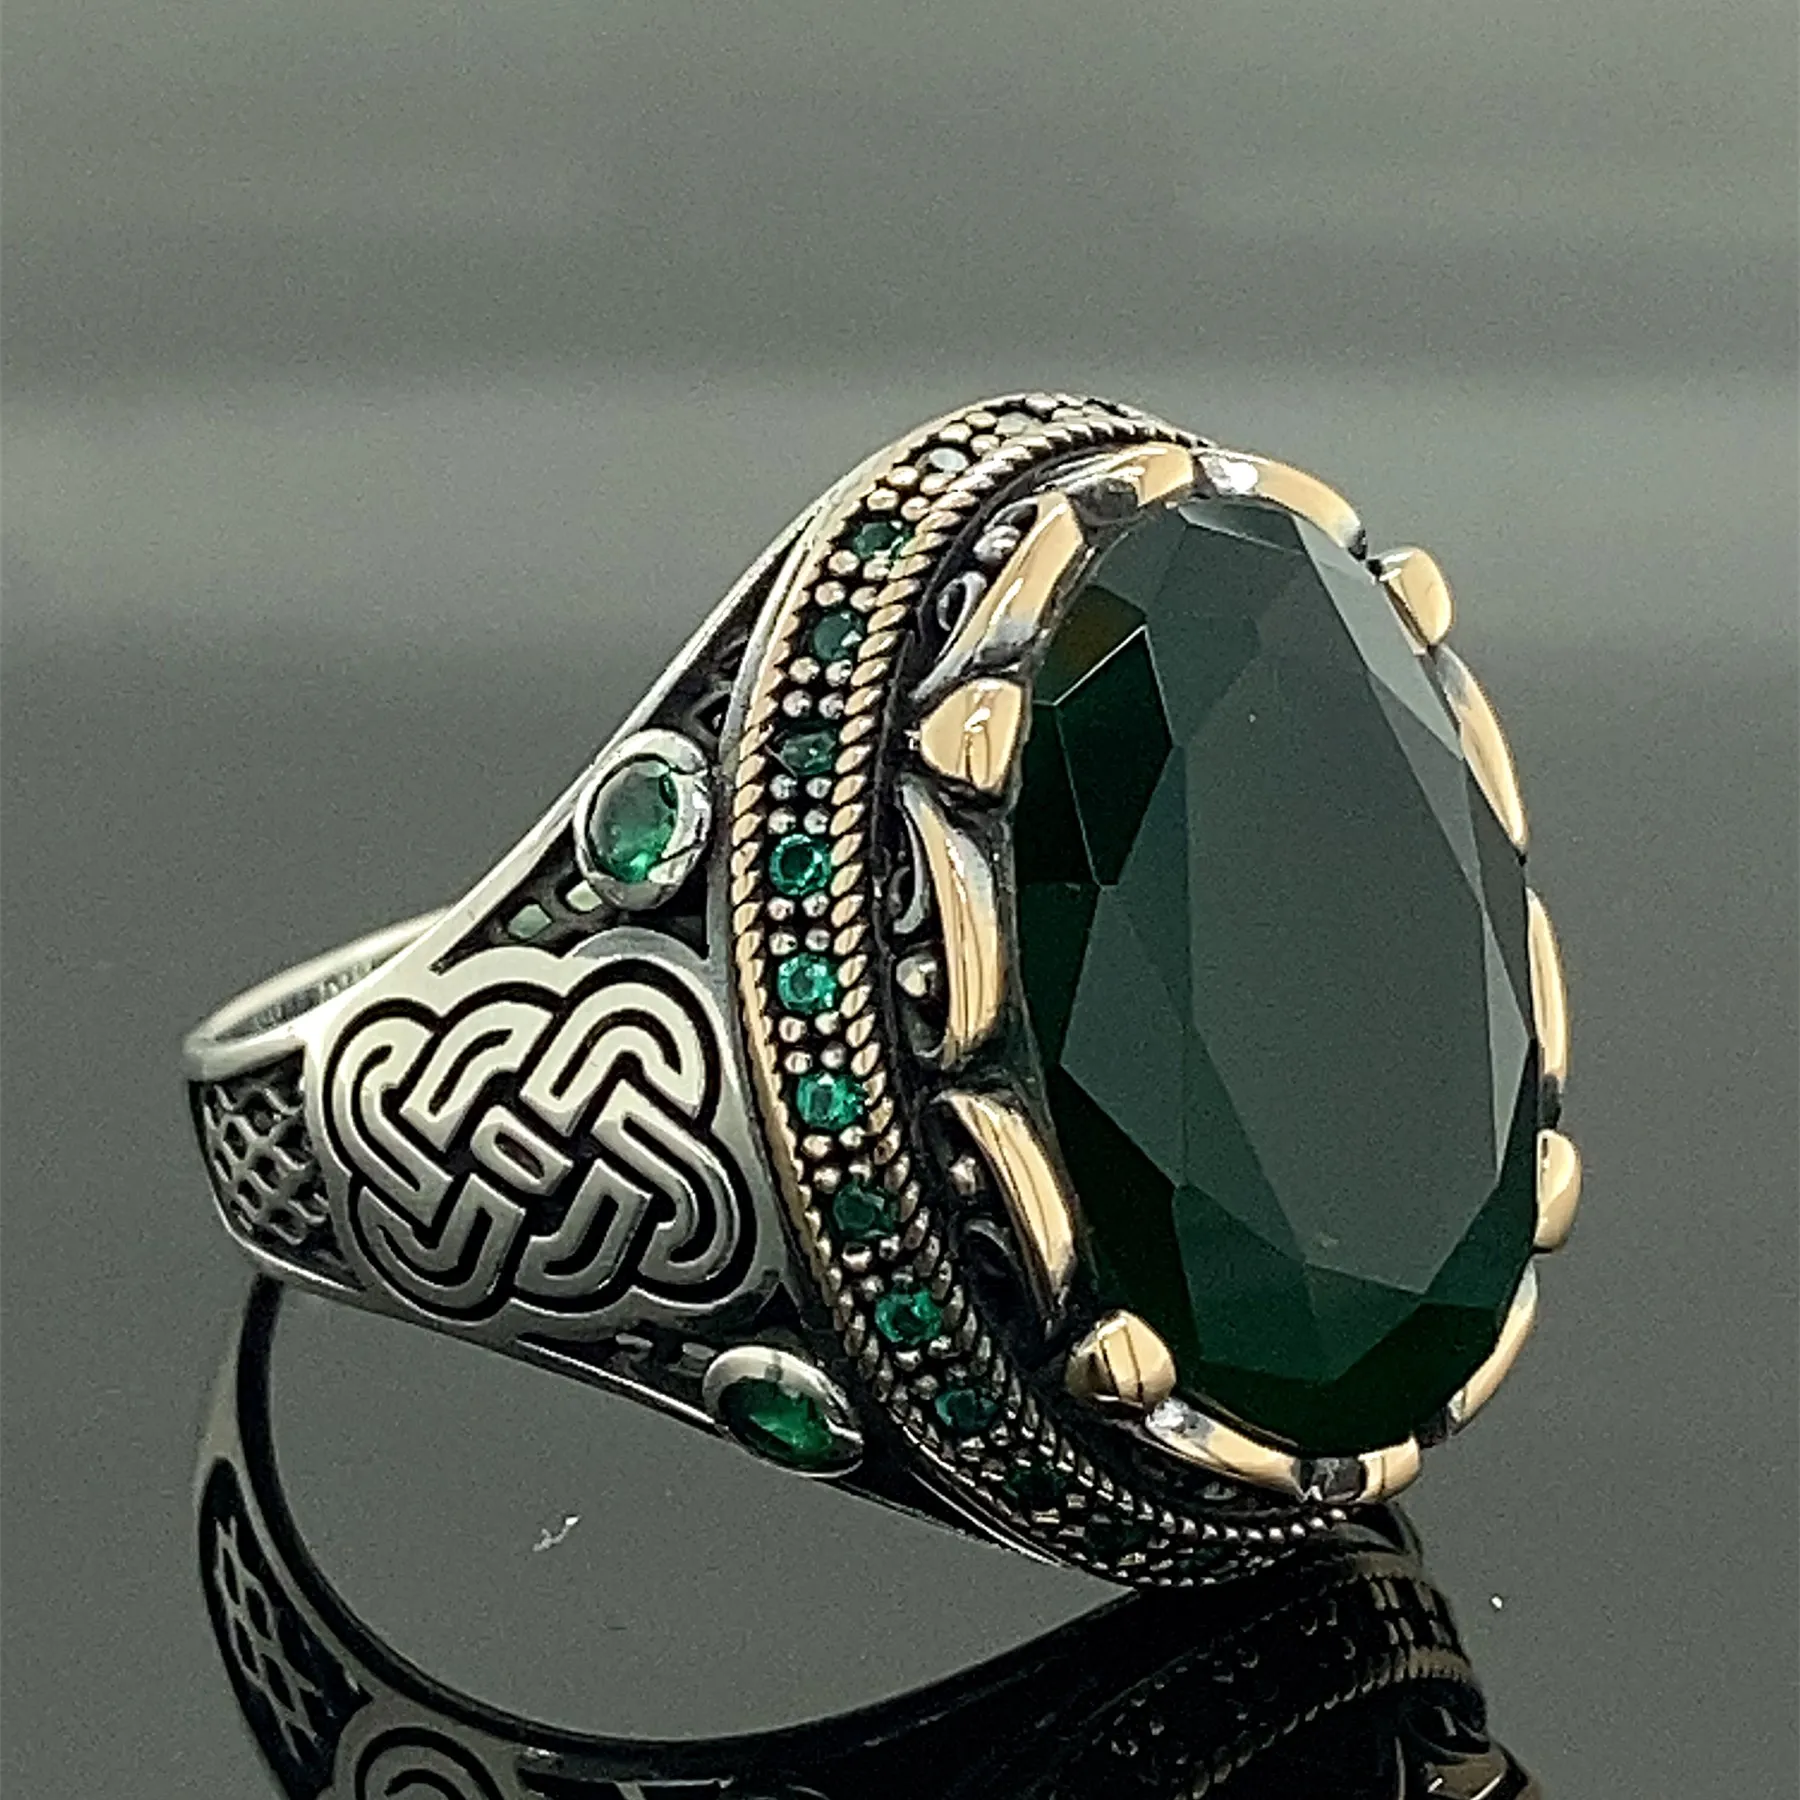 Man Handmade Ring , Emerald Stone Ring , Green Stone Ring , Ottoman Style Men Ring, Gift for Him, 925k Sterling Silver Ring